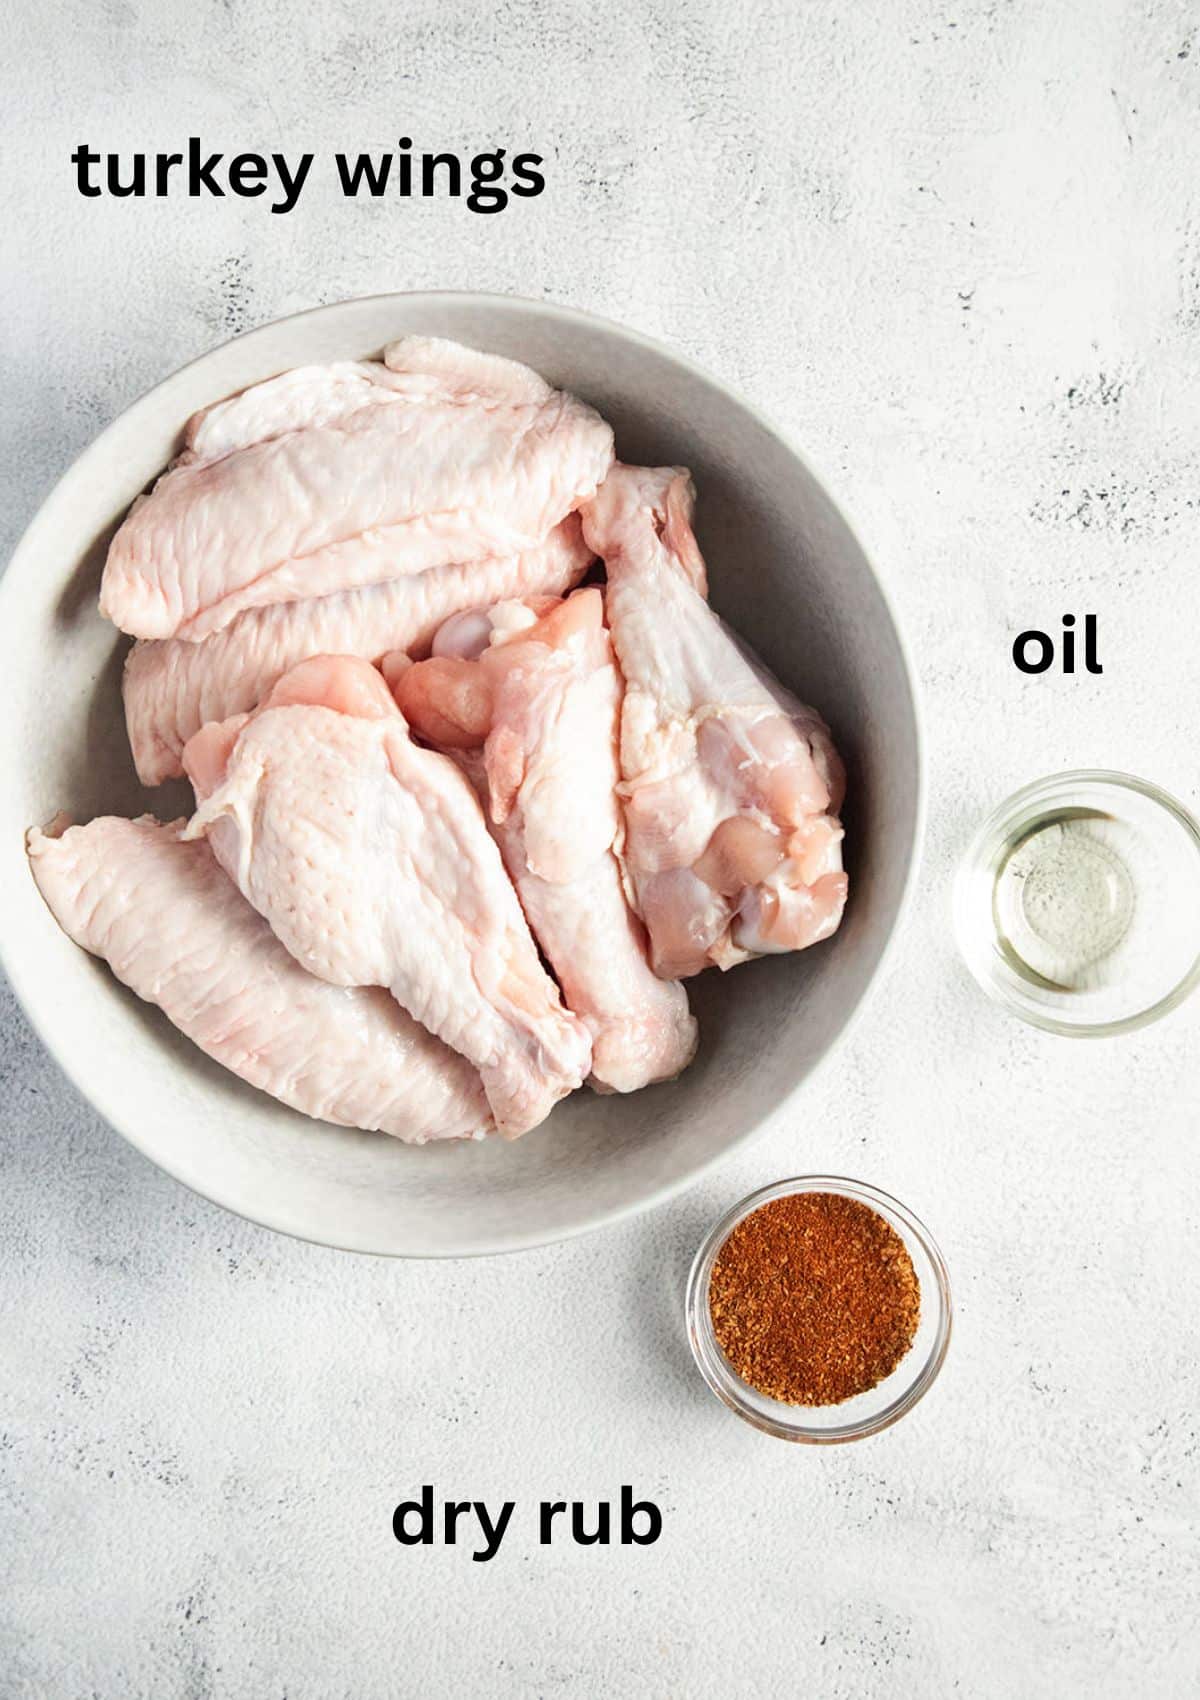 listed ingredients: fresh turkey wings, oil and dry rub in a bowl.